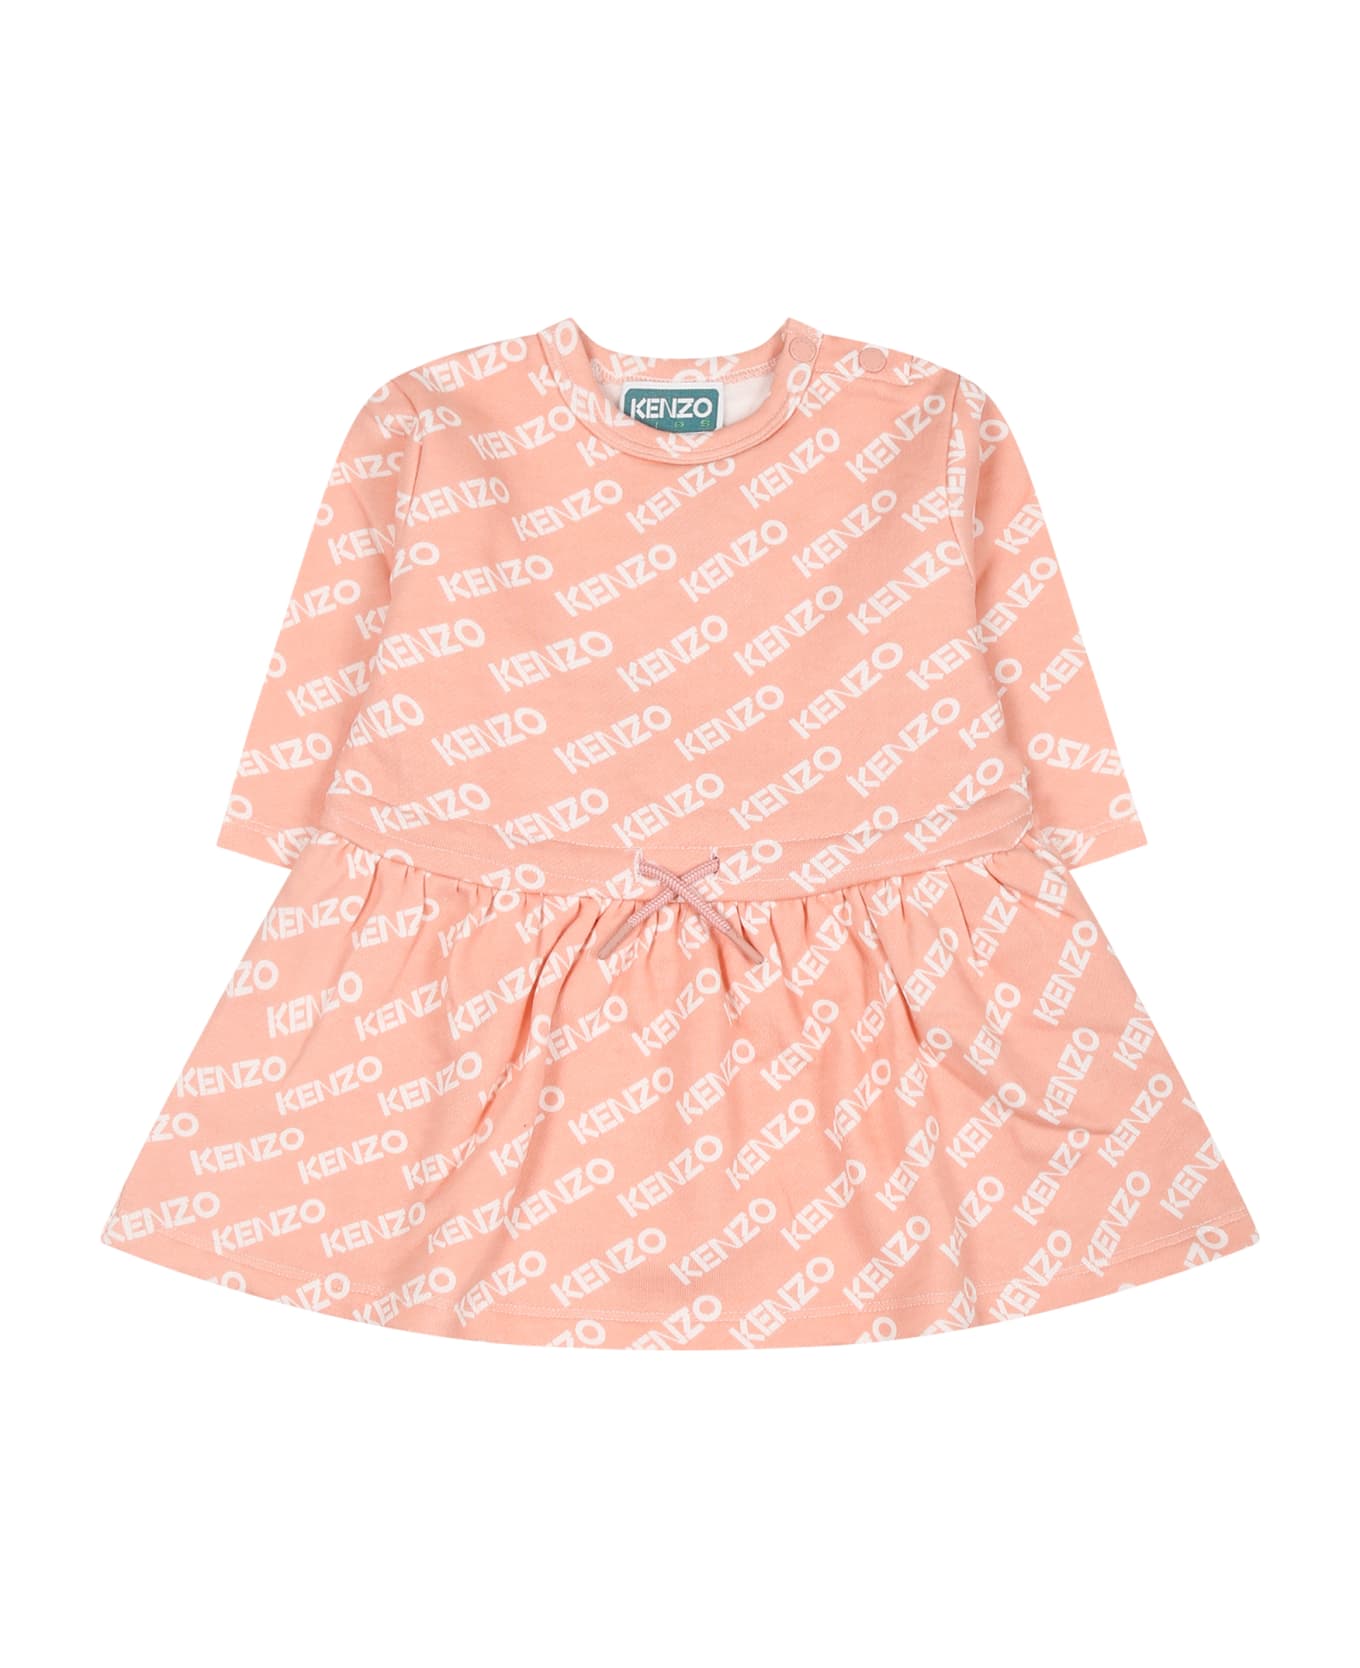 Kenzo Kids Pink Dress For Baby Girl With Logo - Pink